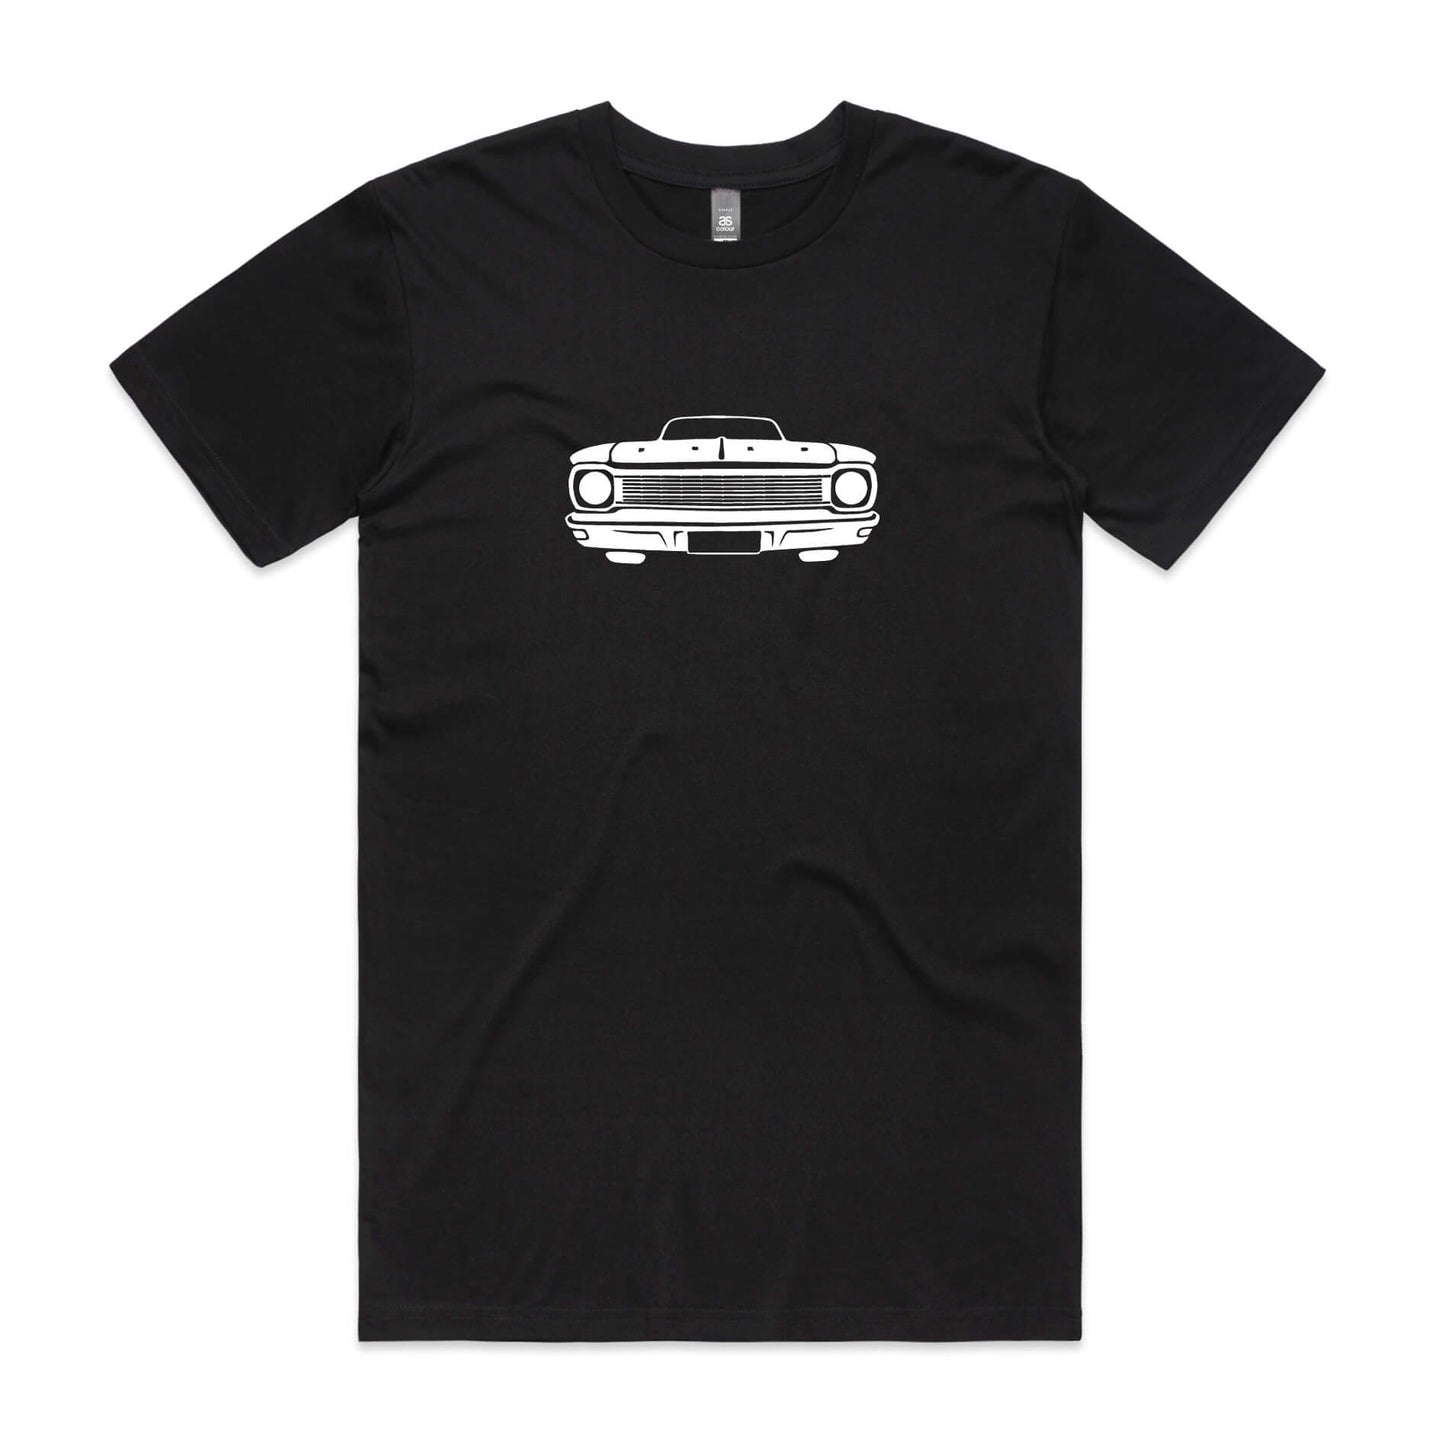 Ford XP Falcon t-shirt in black